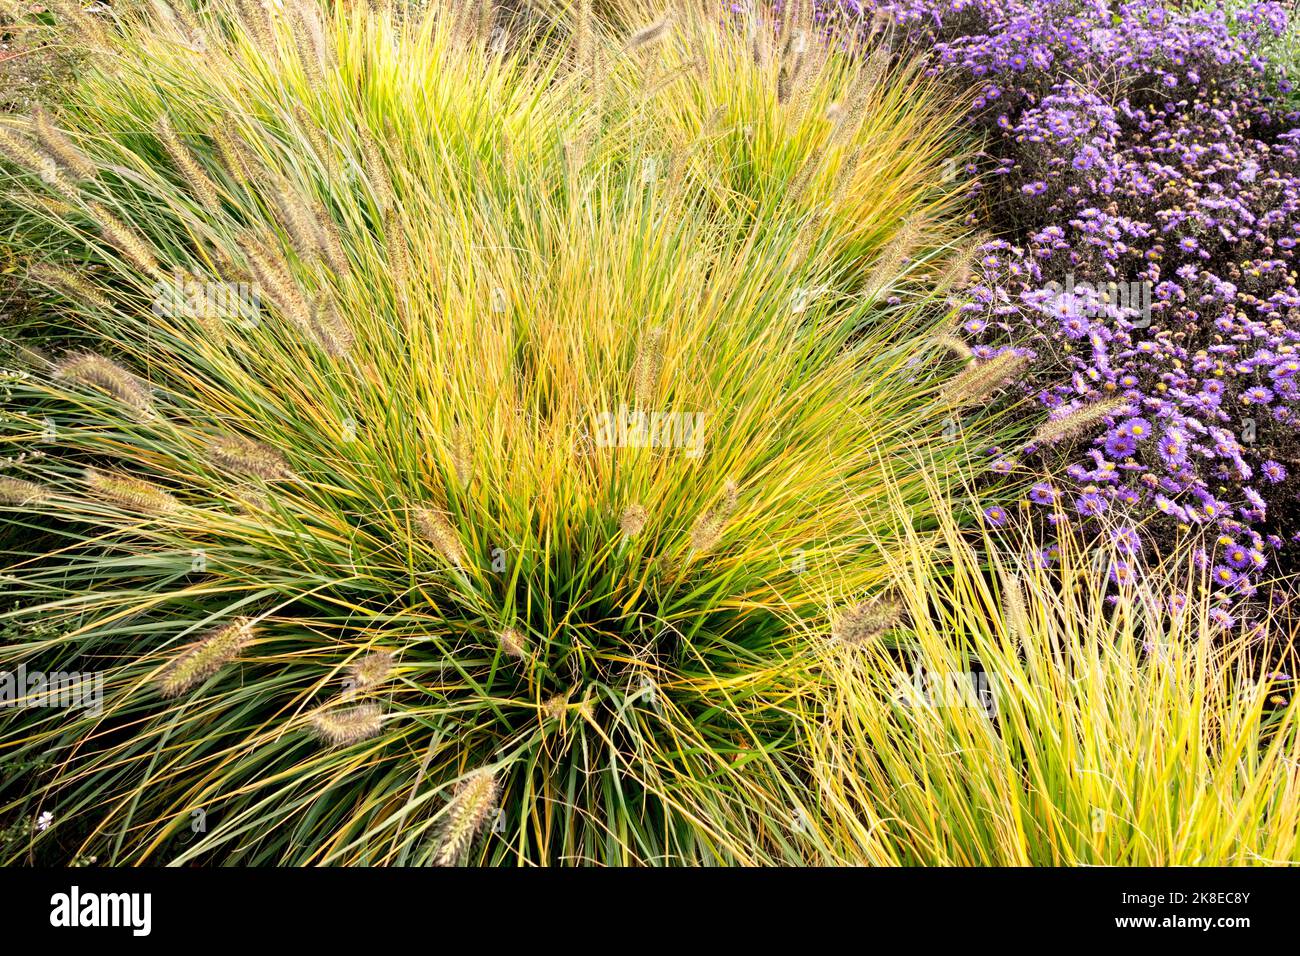 Autumnal Pennisetum alopecuroides autumn tufts of grasses turn to yellow Clumps of Fountain Grass Purple asters in the garden scene Ornamental grasses Stock Photo